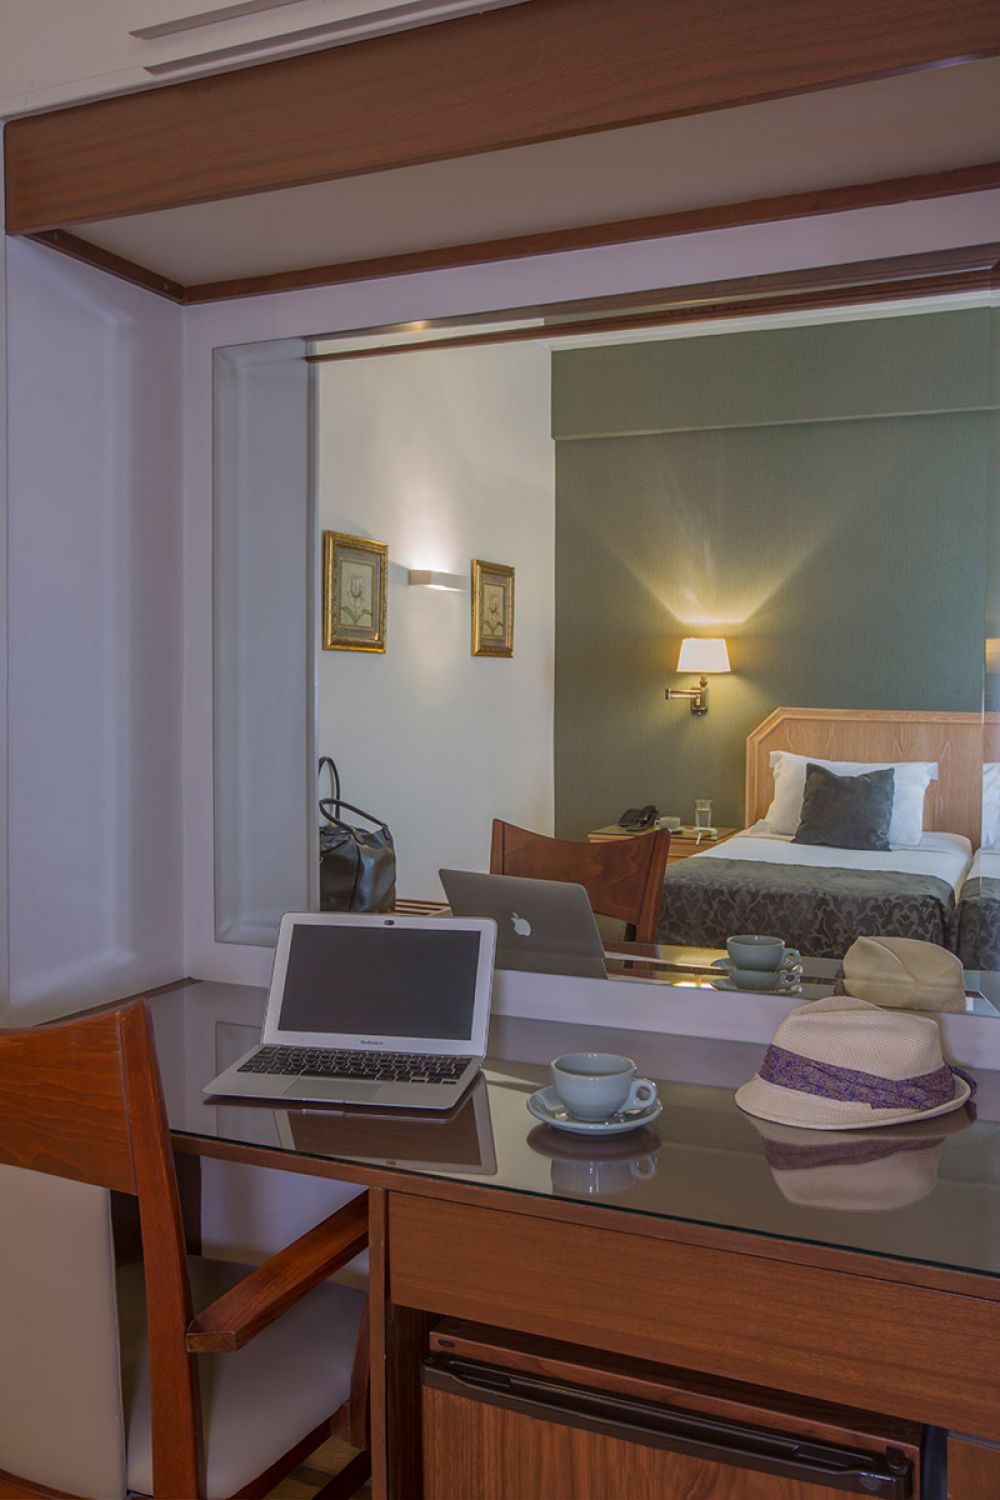 Standard Room, Delice Hotel Family Apartments 4*